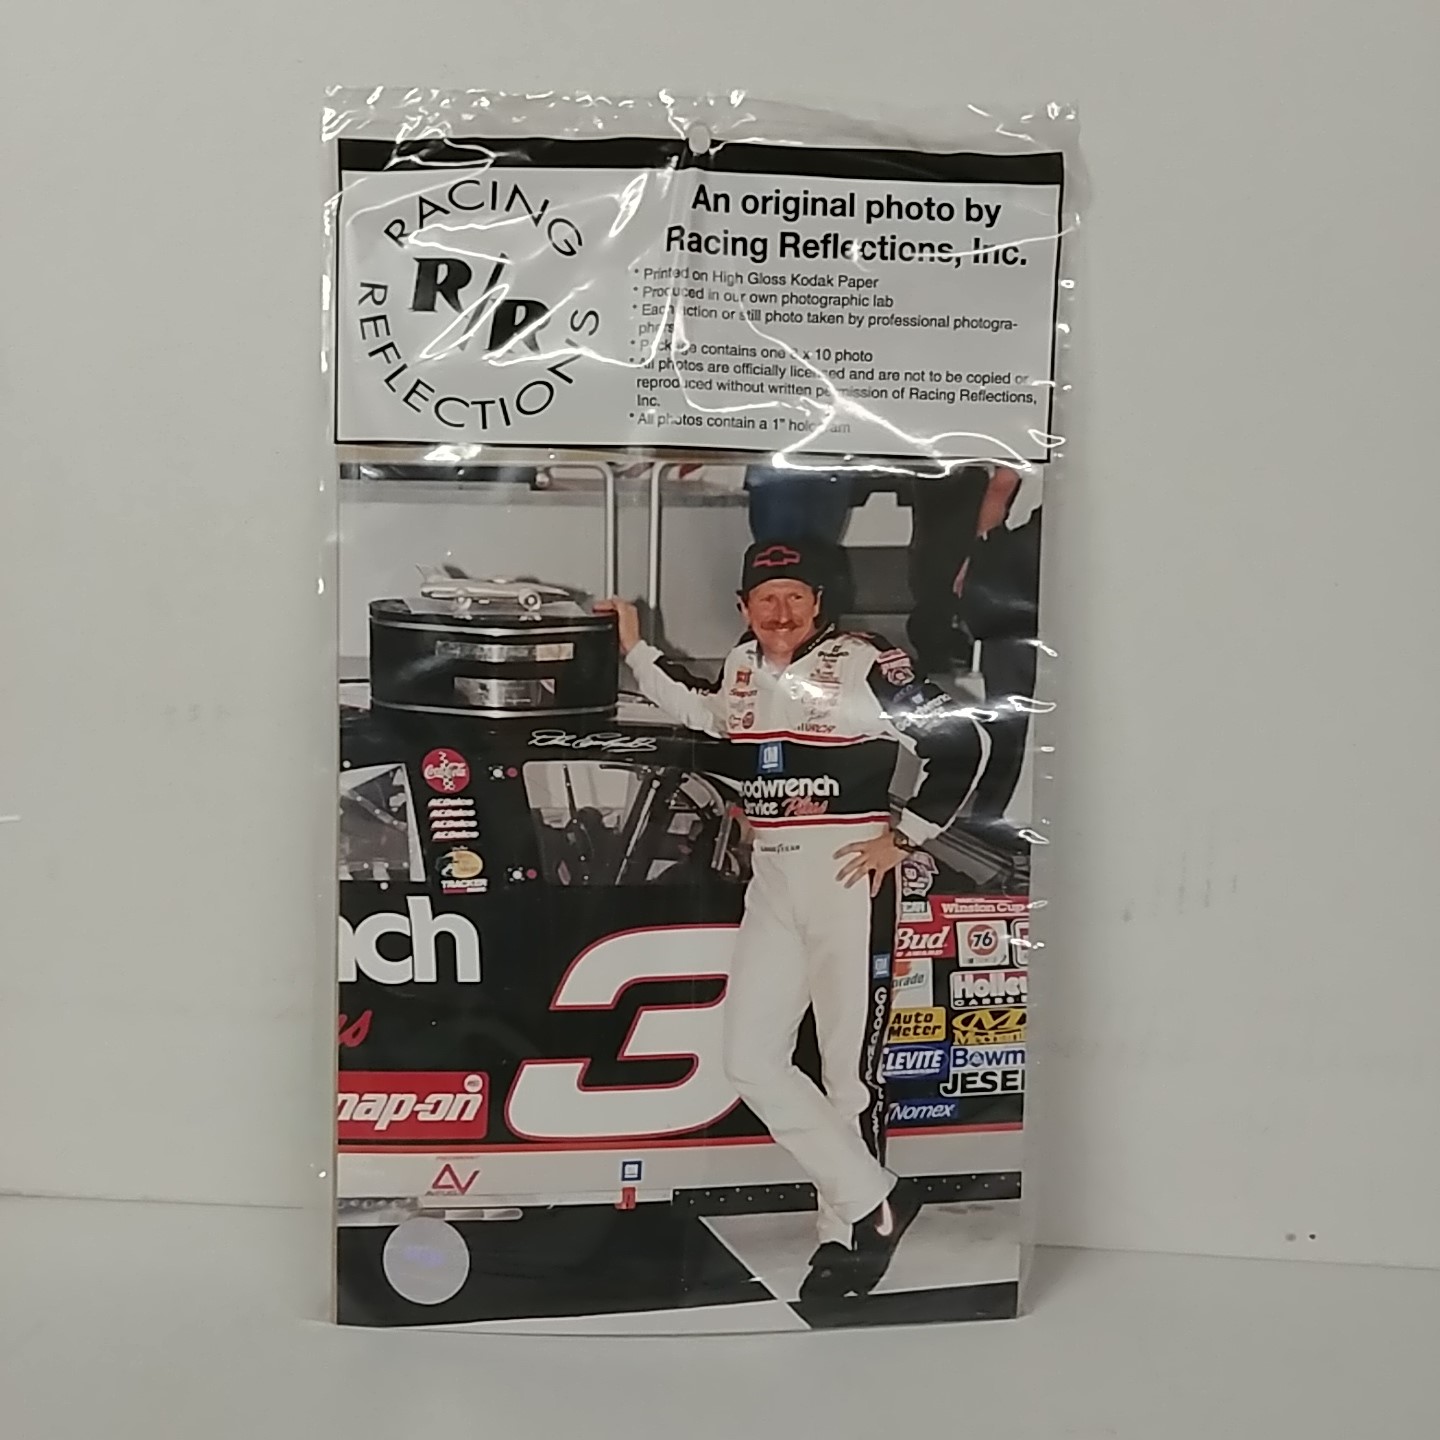 1998 Dale Earnhardt Goodwrench "Daytona Win Trophy" Racing Reflections Photo